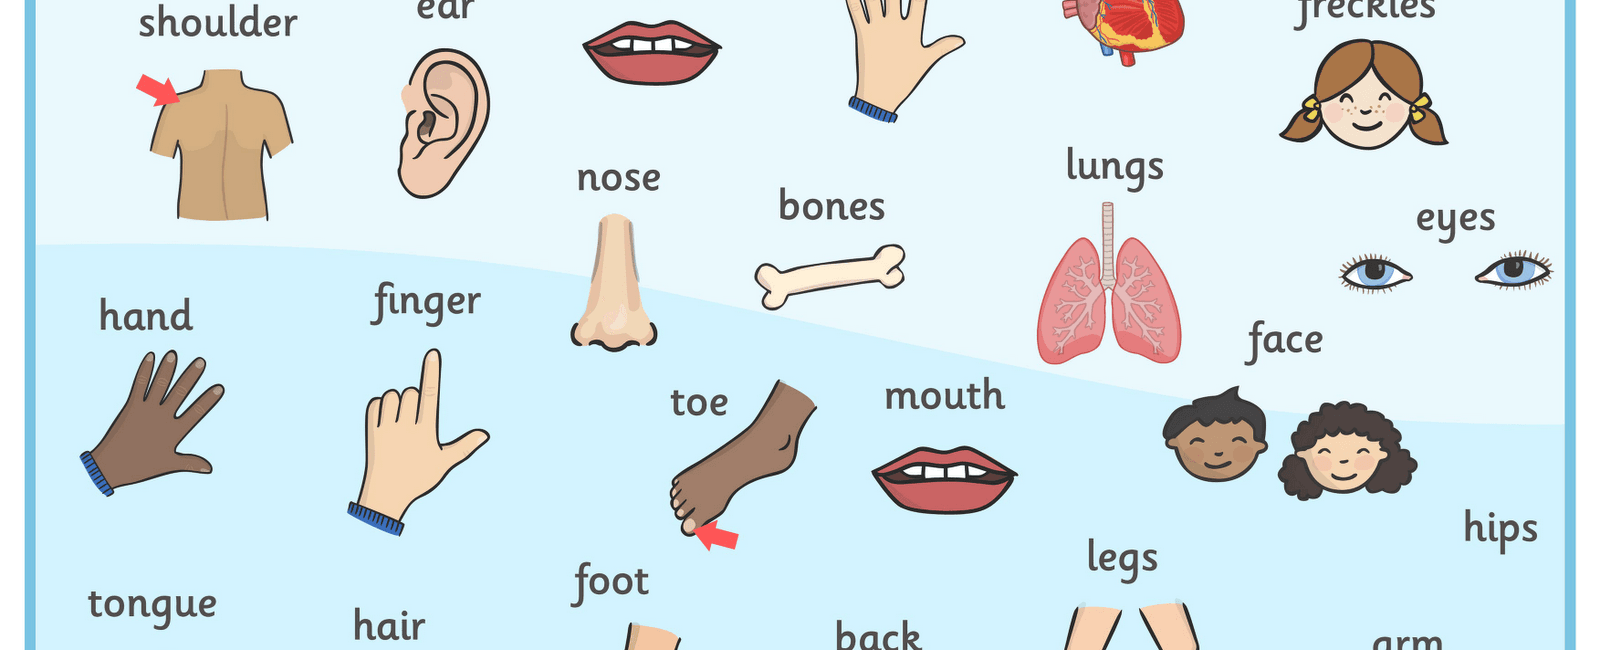 There are 10 human body parts that are only 3 letters long eye hip arm leg ear toe jaw rib lip gum